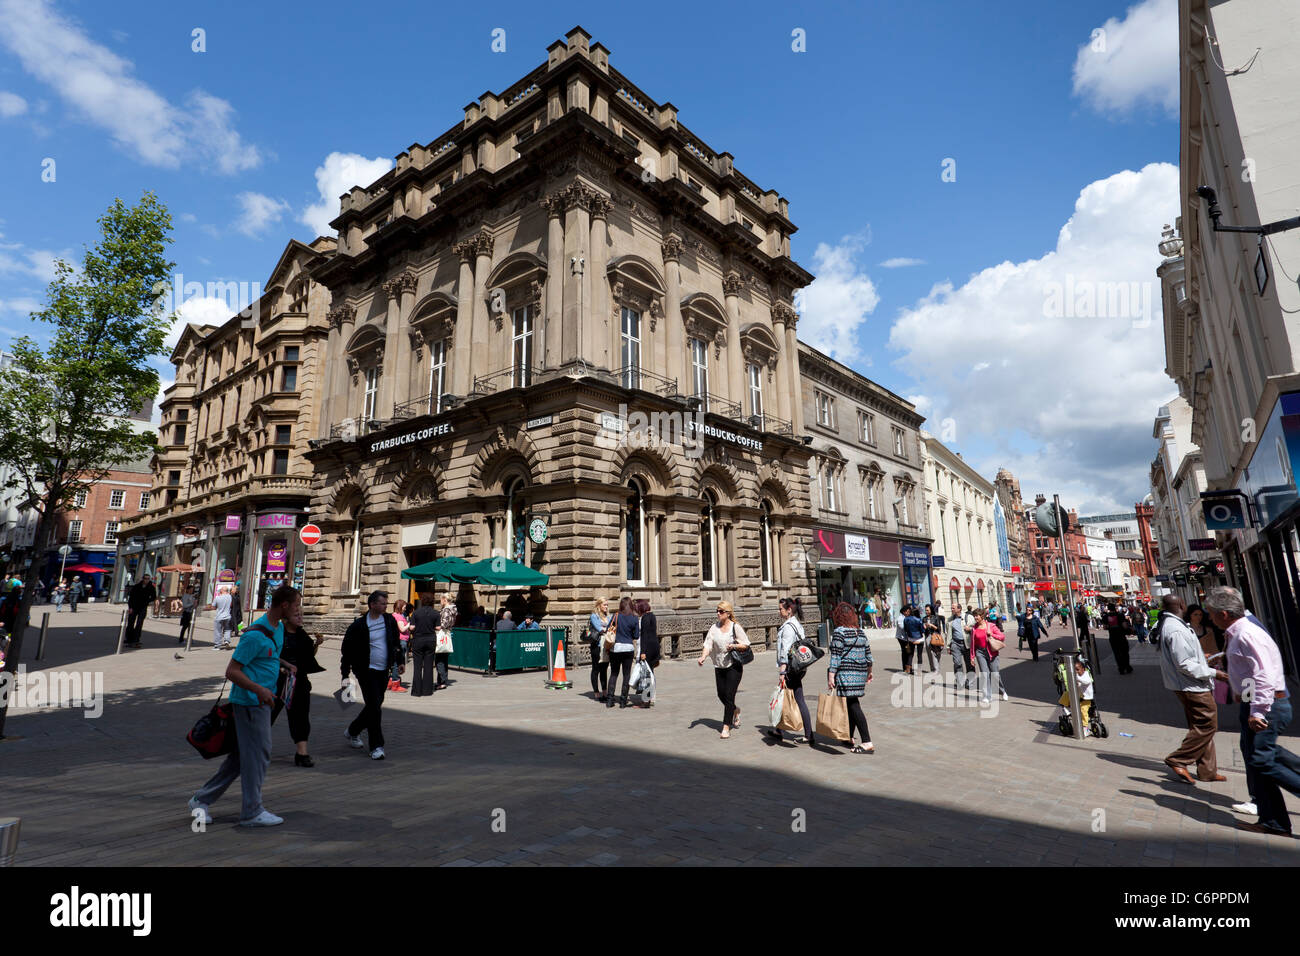 The former Leeds Co-op building, built in 1852 it now houses a branch of Starbucks. Stock Photo